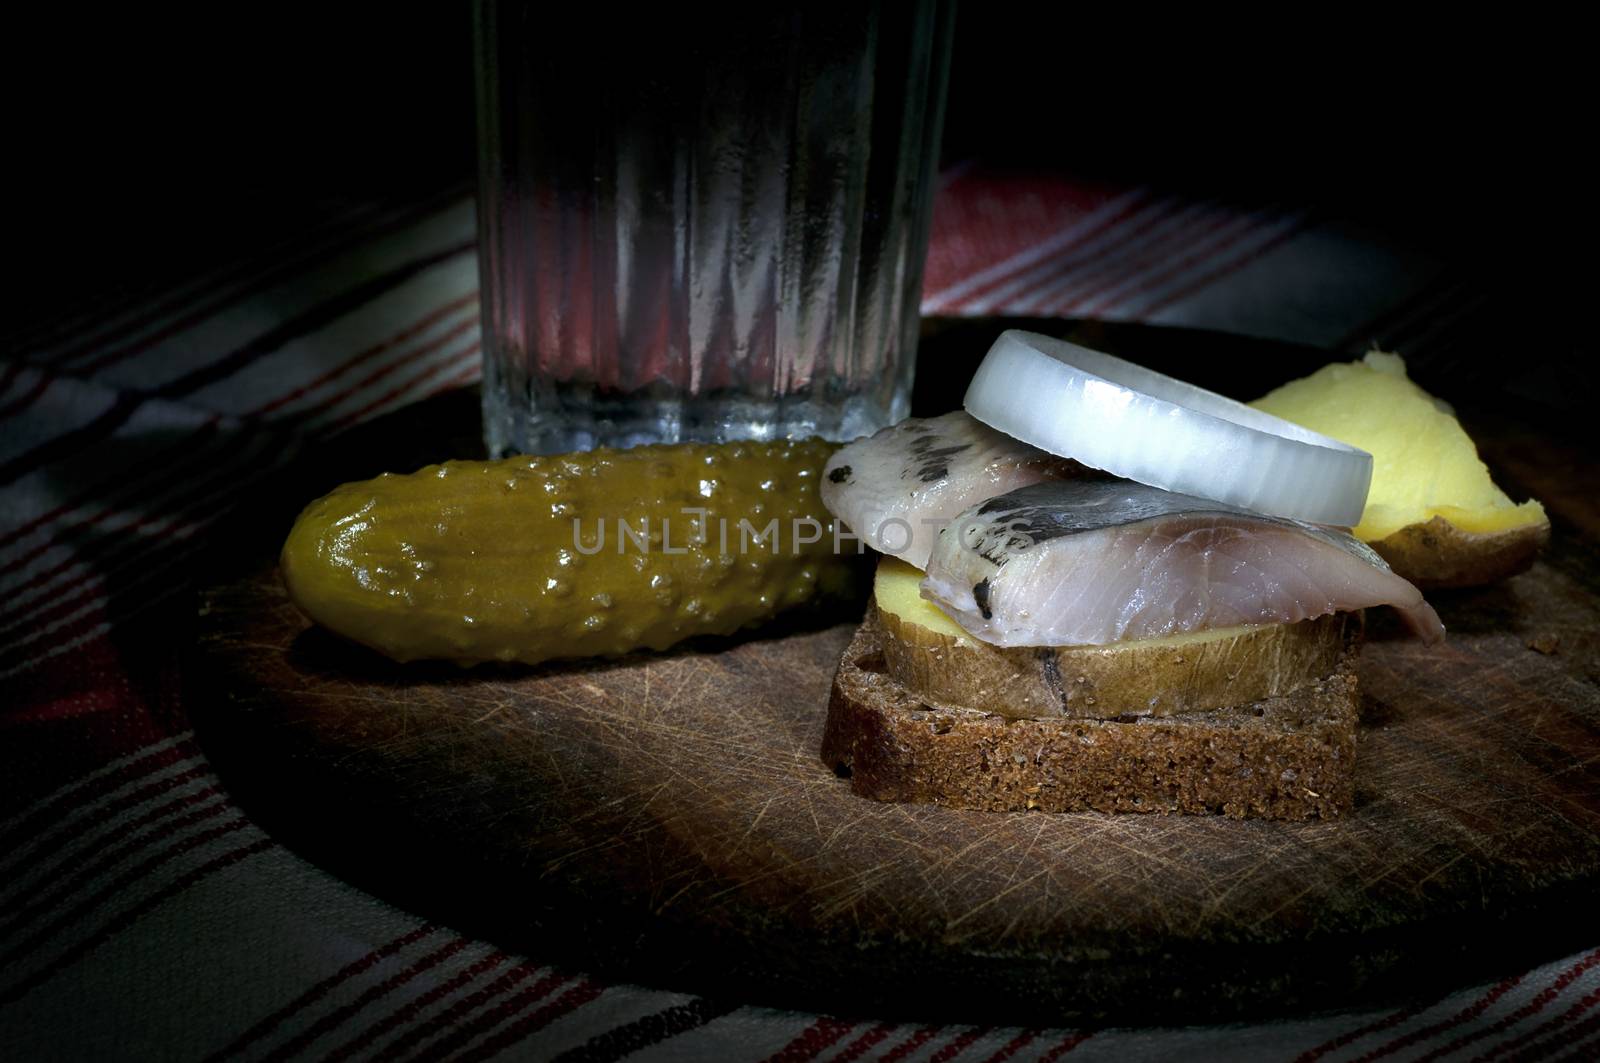 Sandwich made of herring on boiled jacket potato and rye bread served with vodka